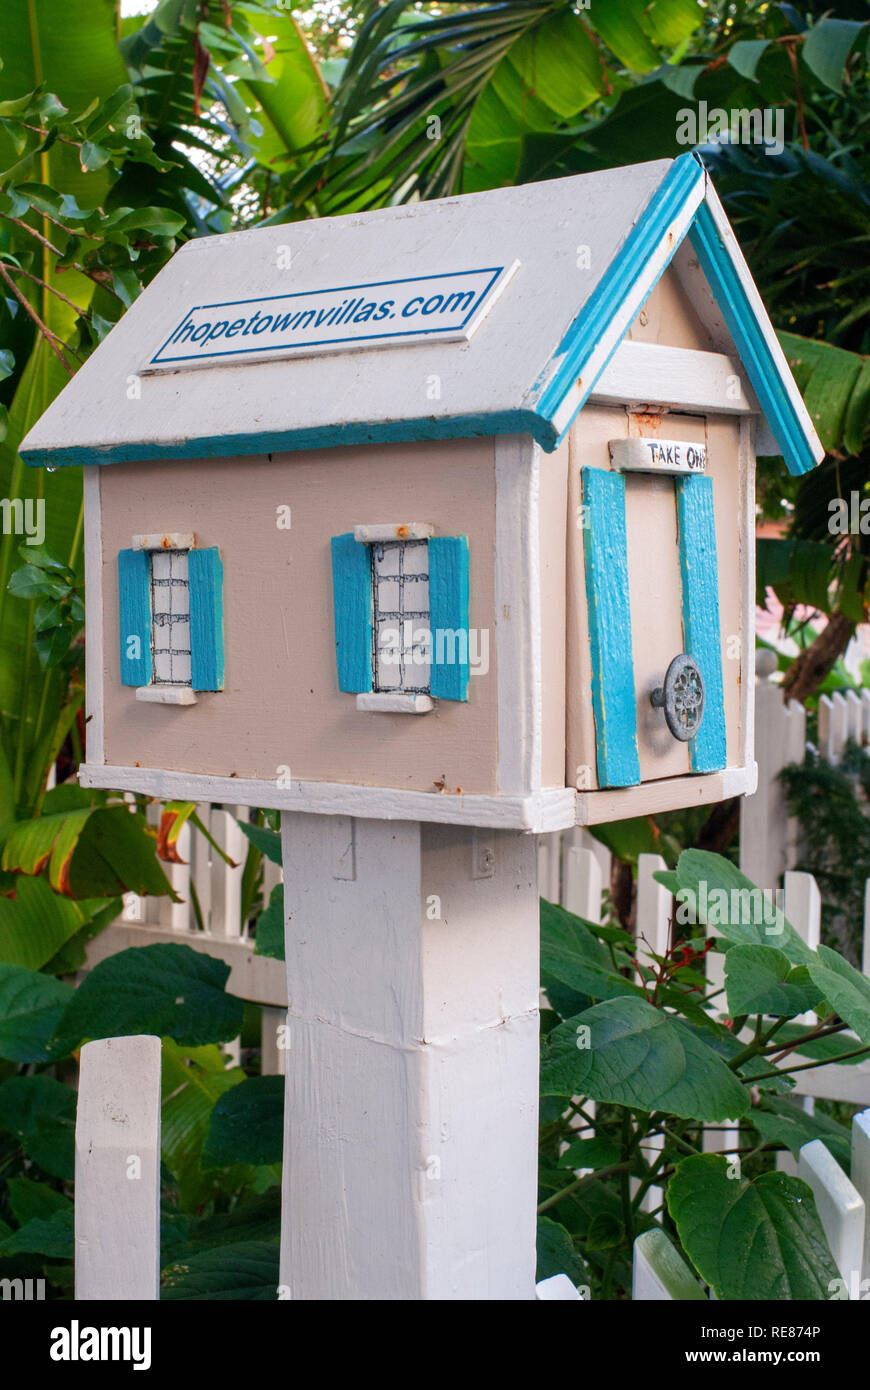 Mailbox of a Typical loyalist house, Hope Town, Elbow Cay, Abacos. Bahamas Stock Photo